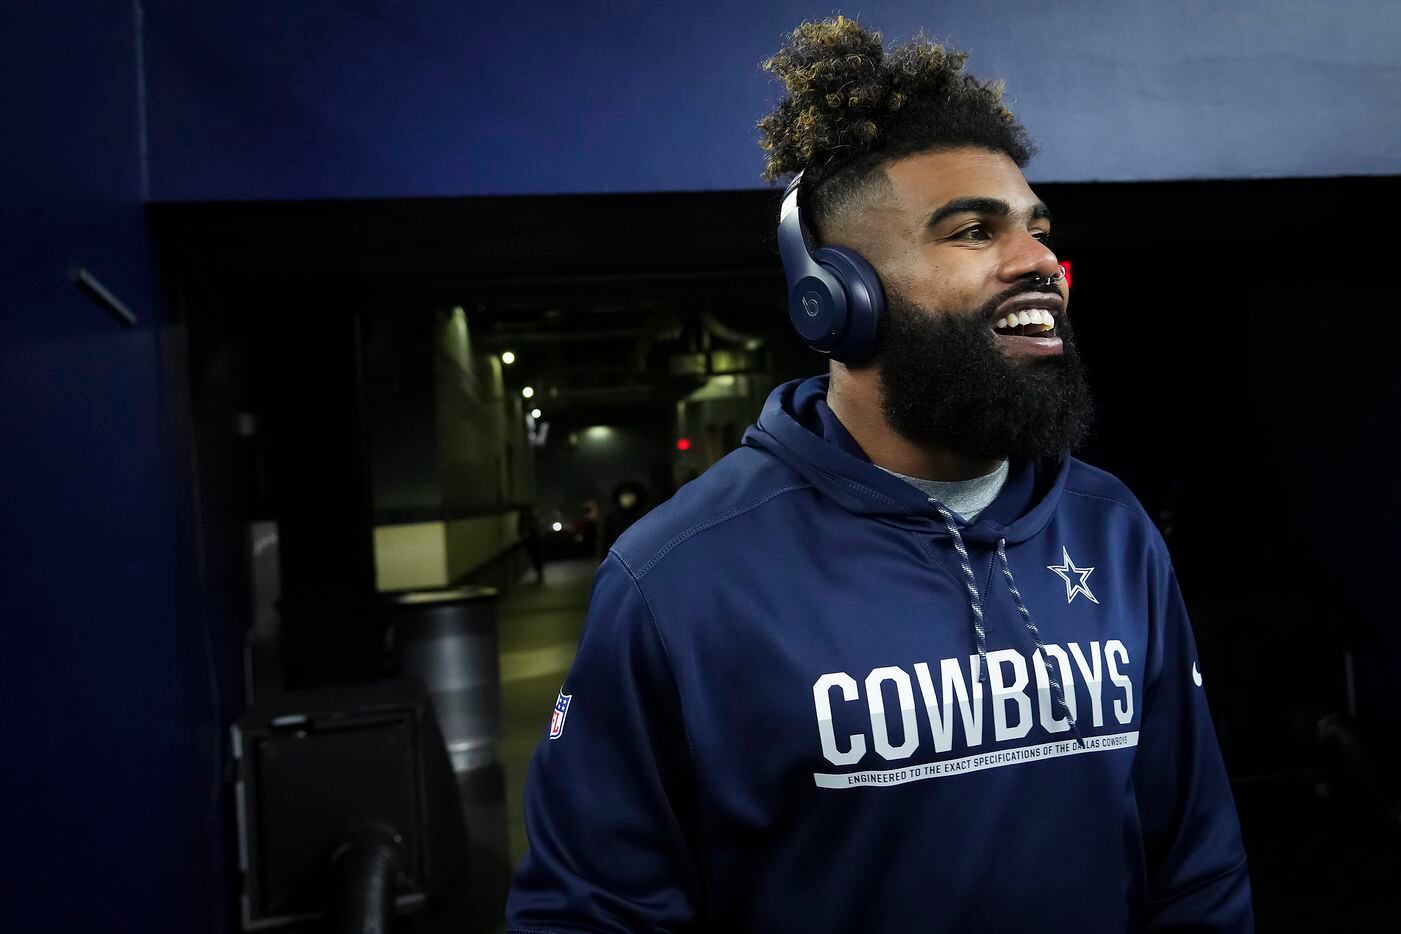 Dallas Cowboys running back Ezekiel Elliott takes the field to warm up before an NFL football game against the Washington Football Team at AT&T Stadium on Sunday, Dec. 26, 2021, in Arlington.